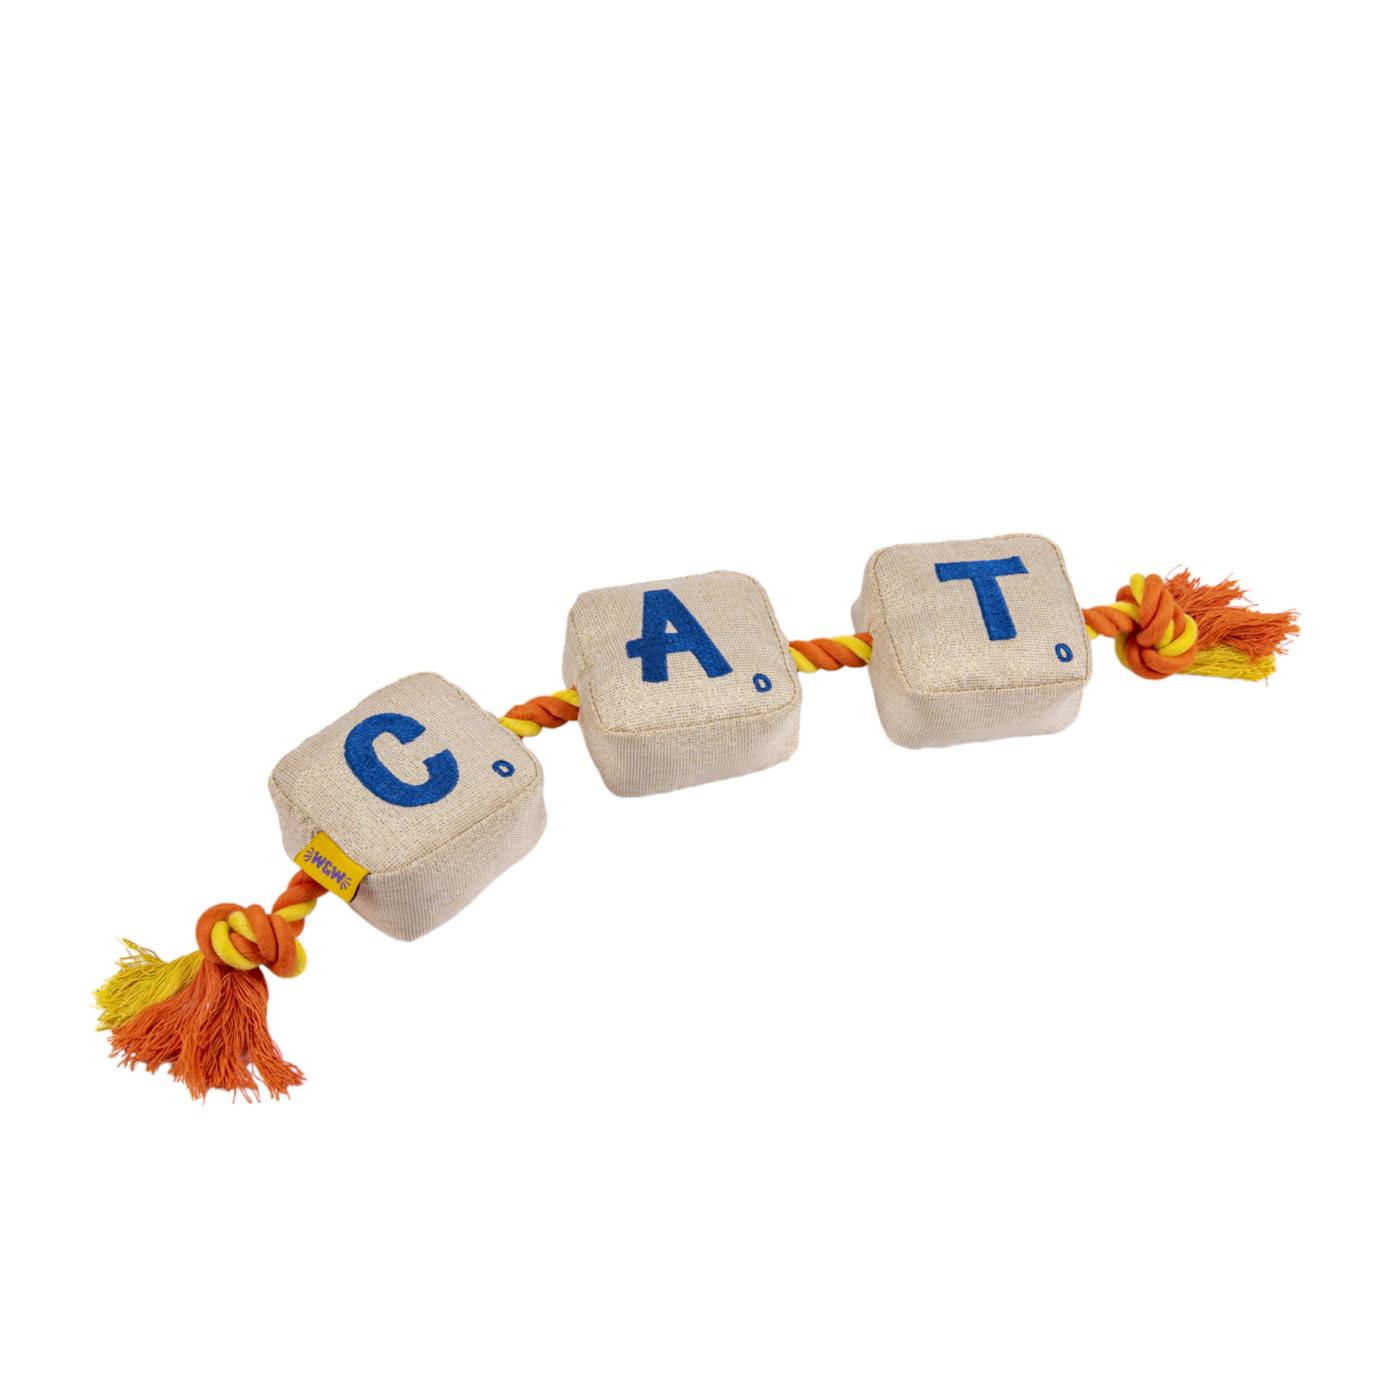 Woof & Whiskers Dog Toy - Letter Chips On Rope; image 6 of 6